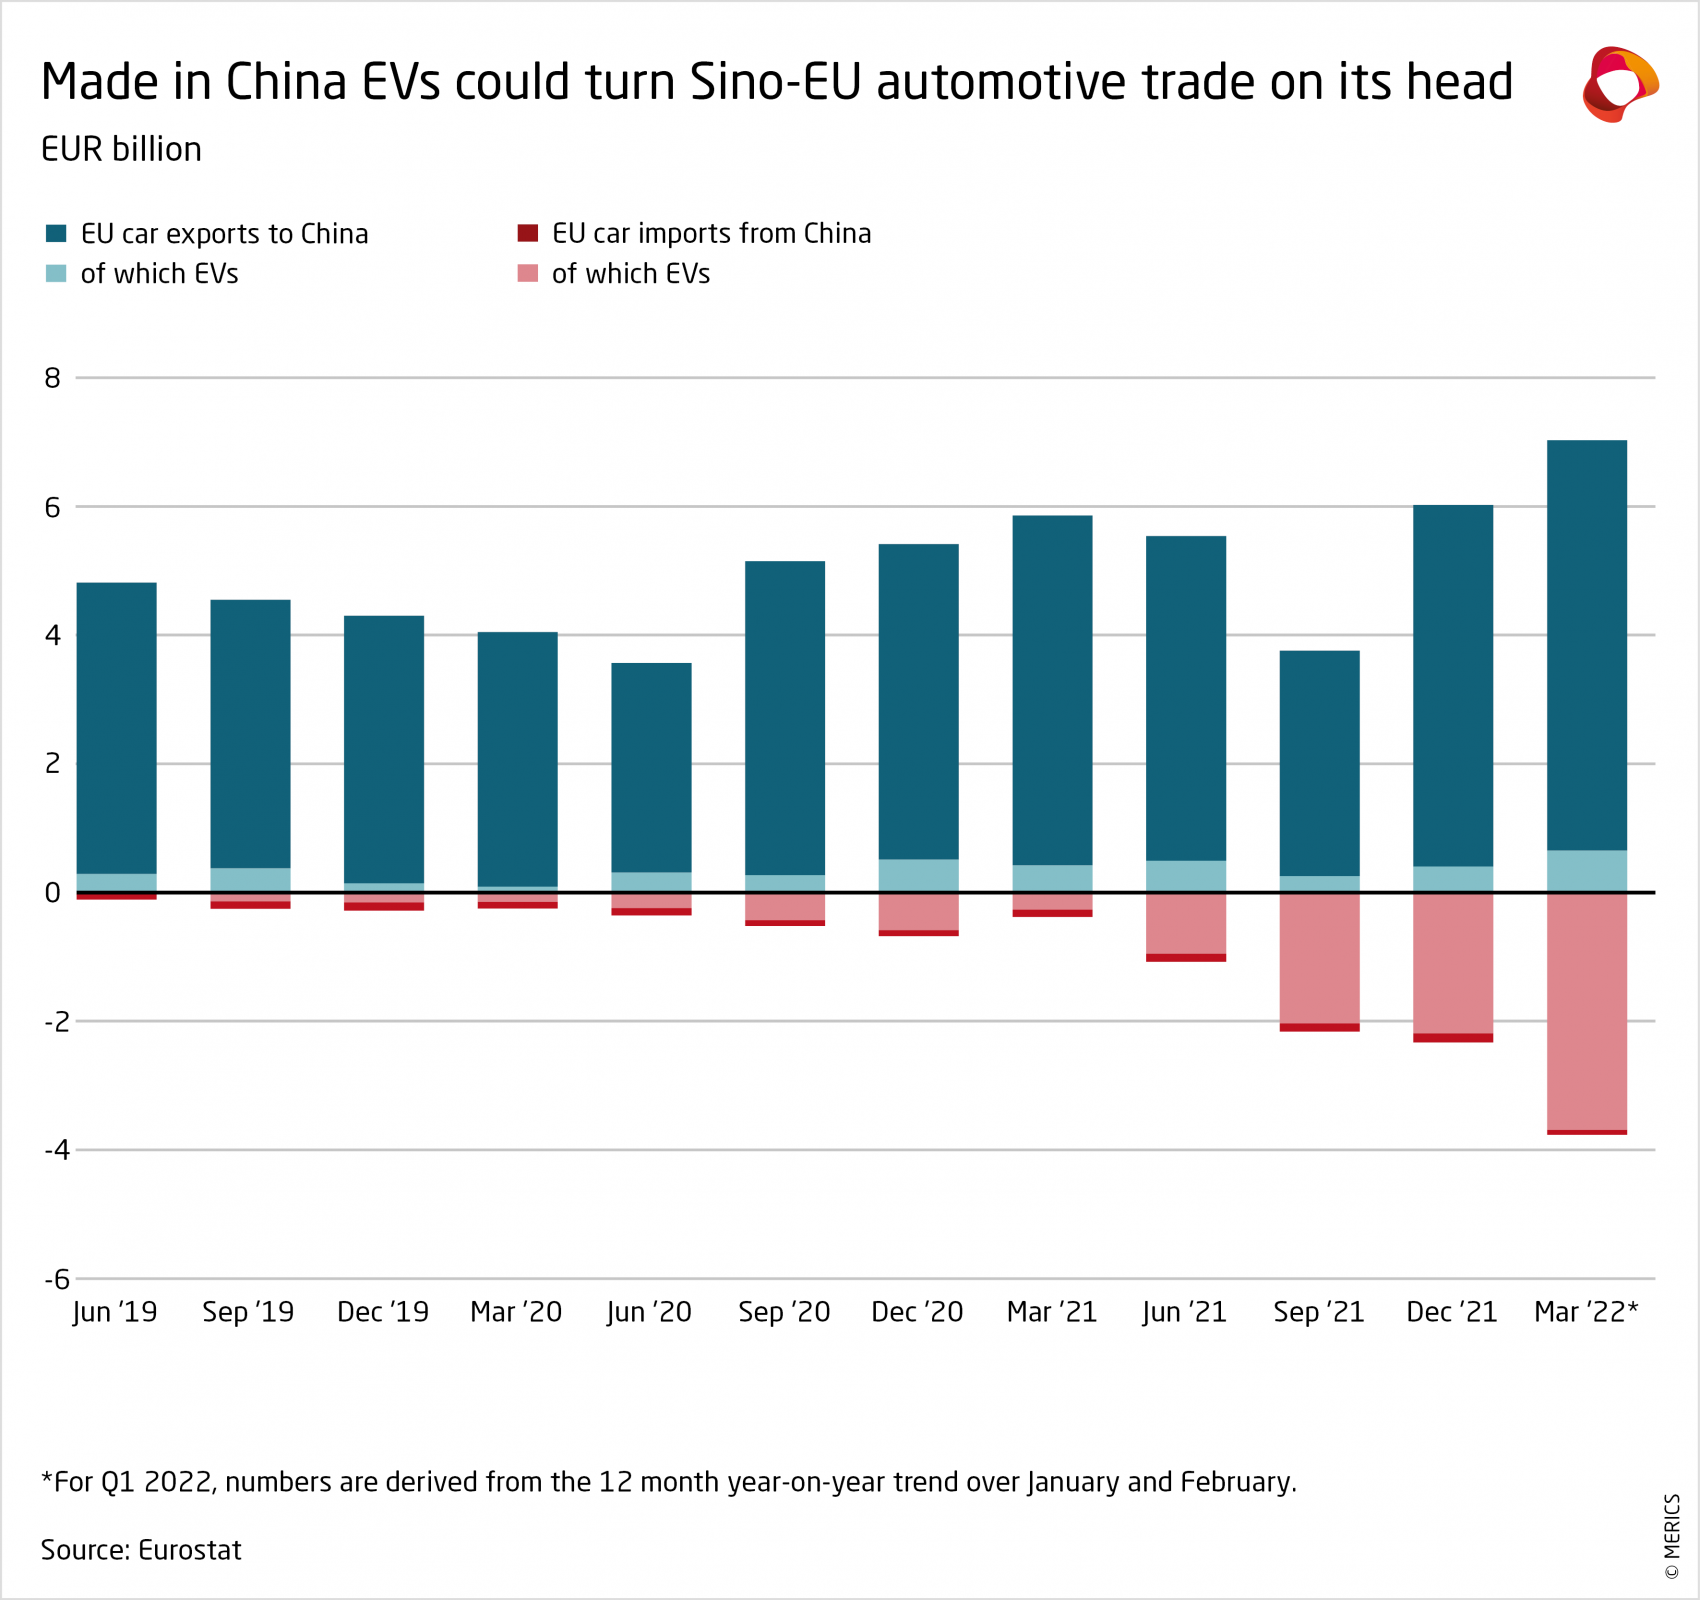 Made in China EVs could turn Sino-EU automotive trade on its head